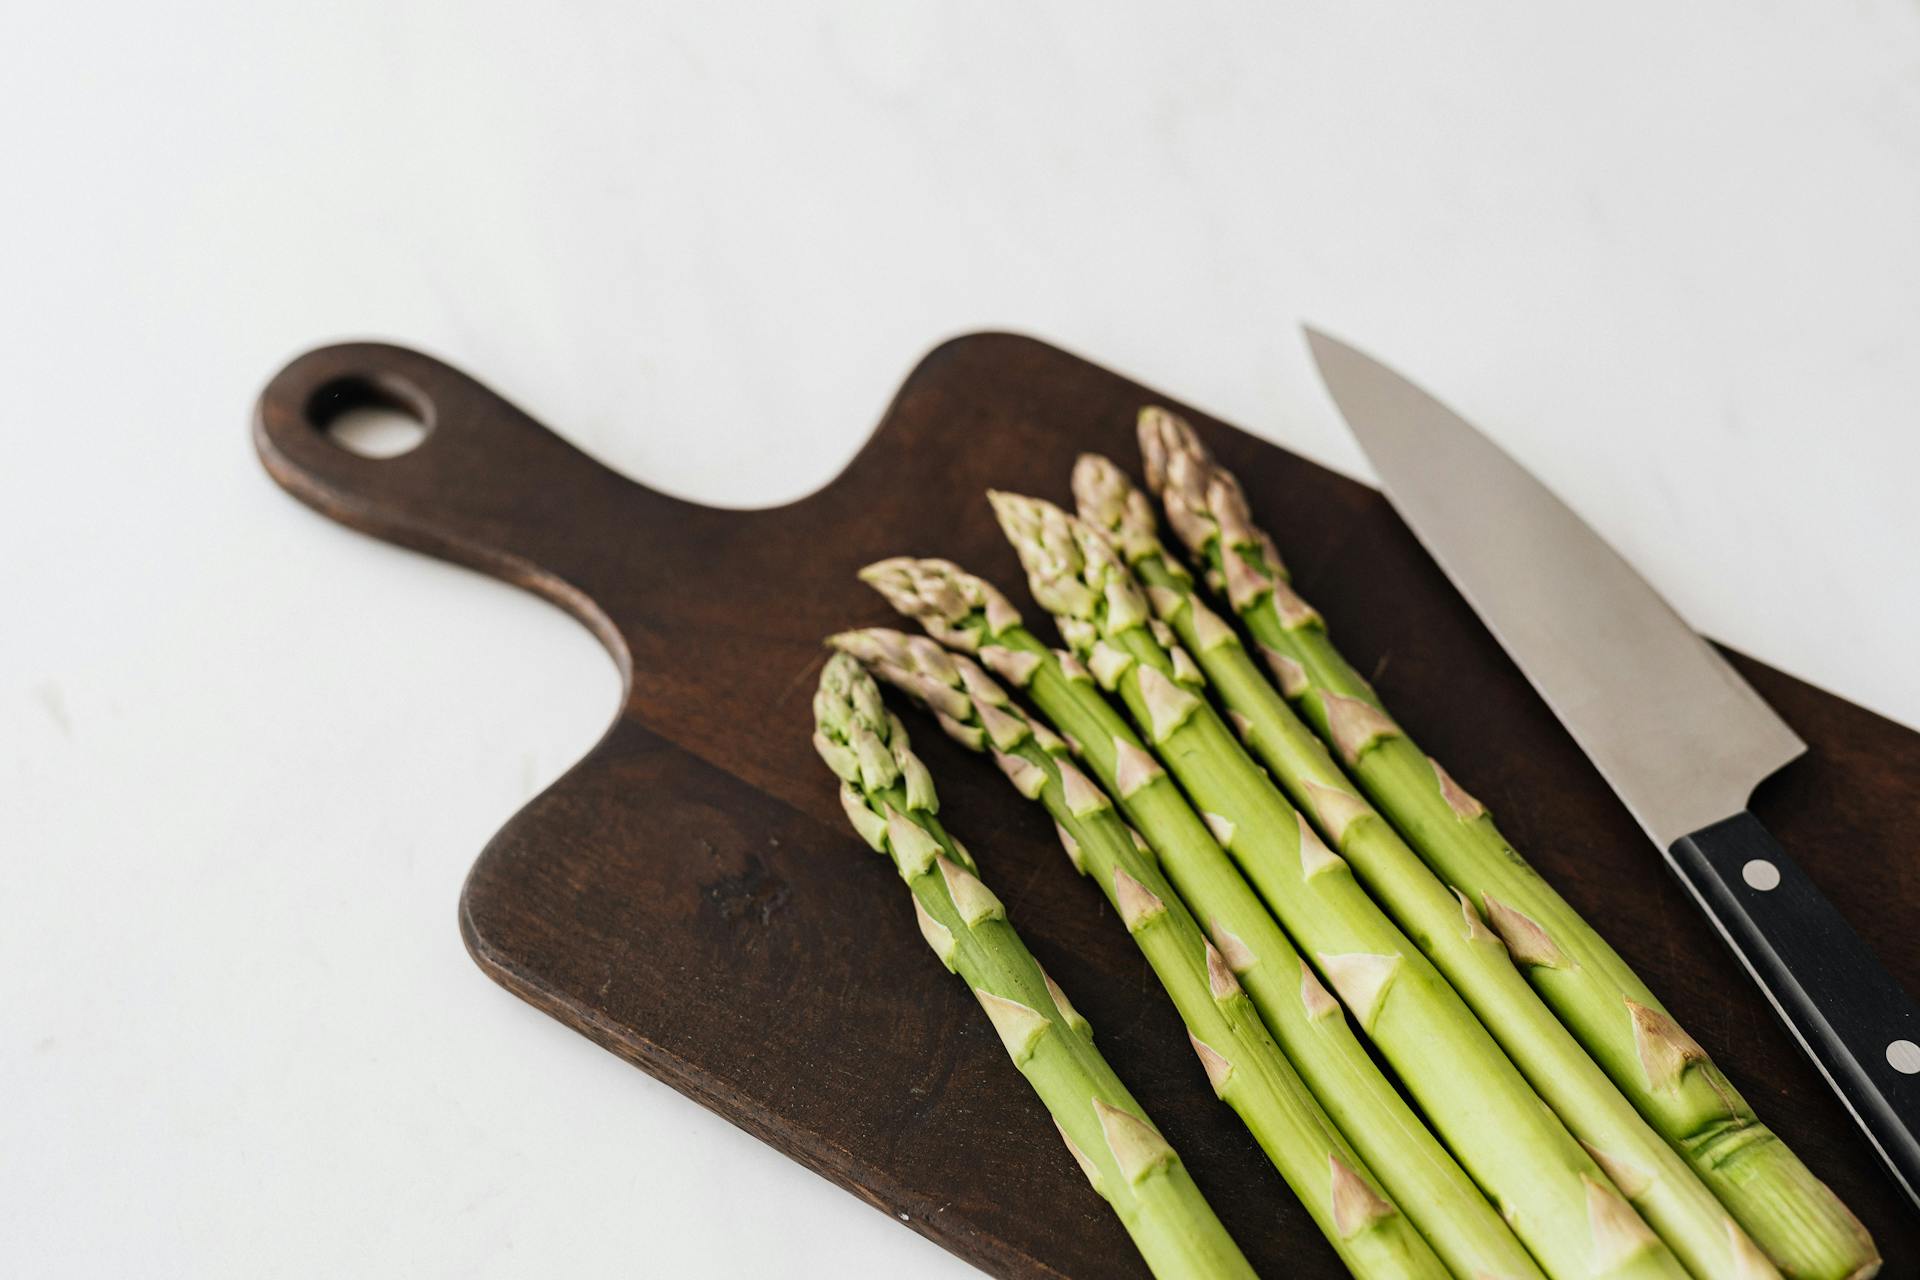 Fresh asparagus on a wooden board with a knife | Source: Pexels